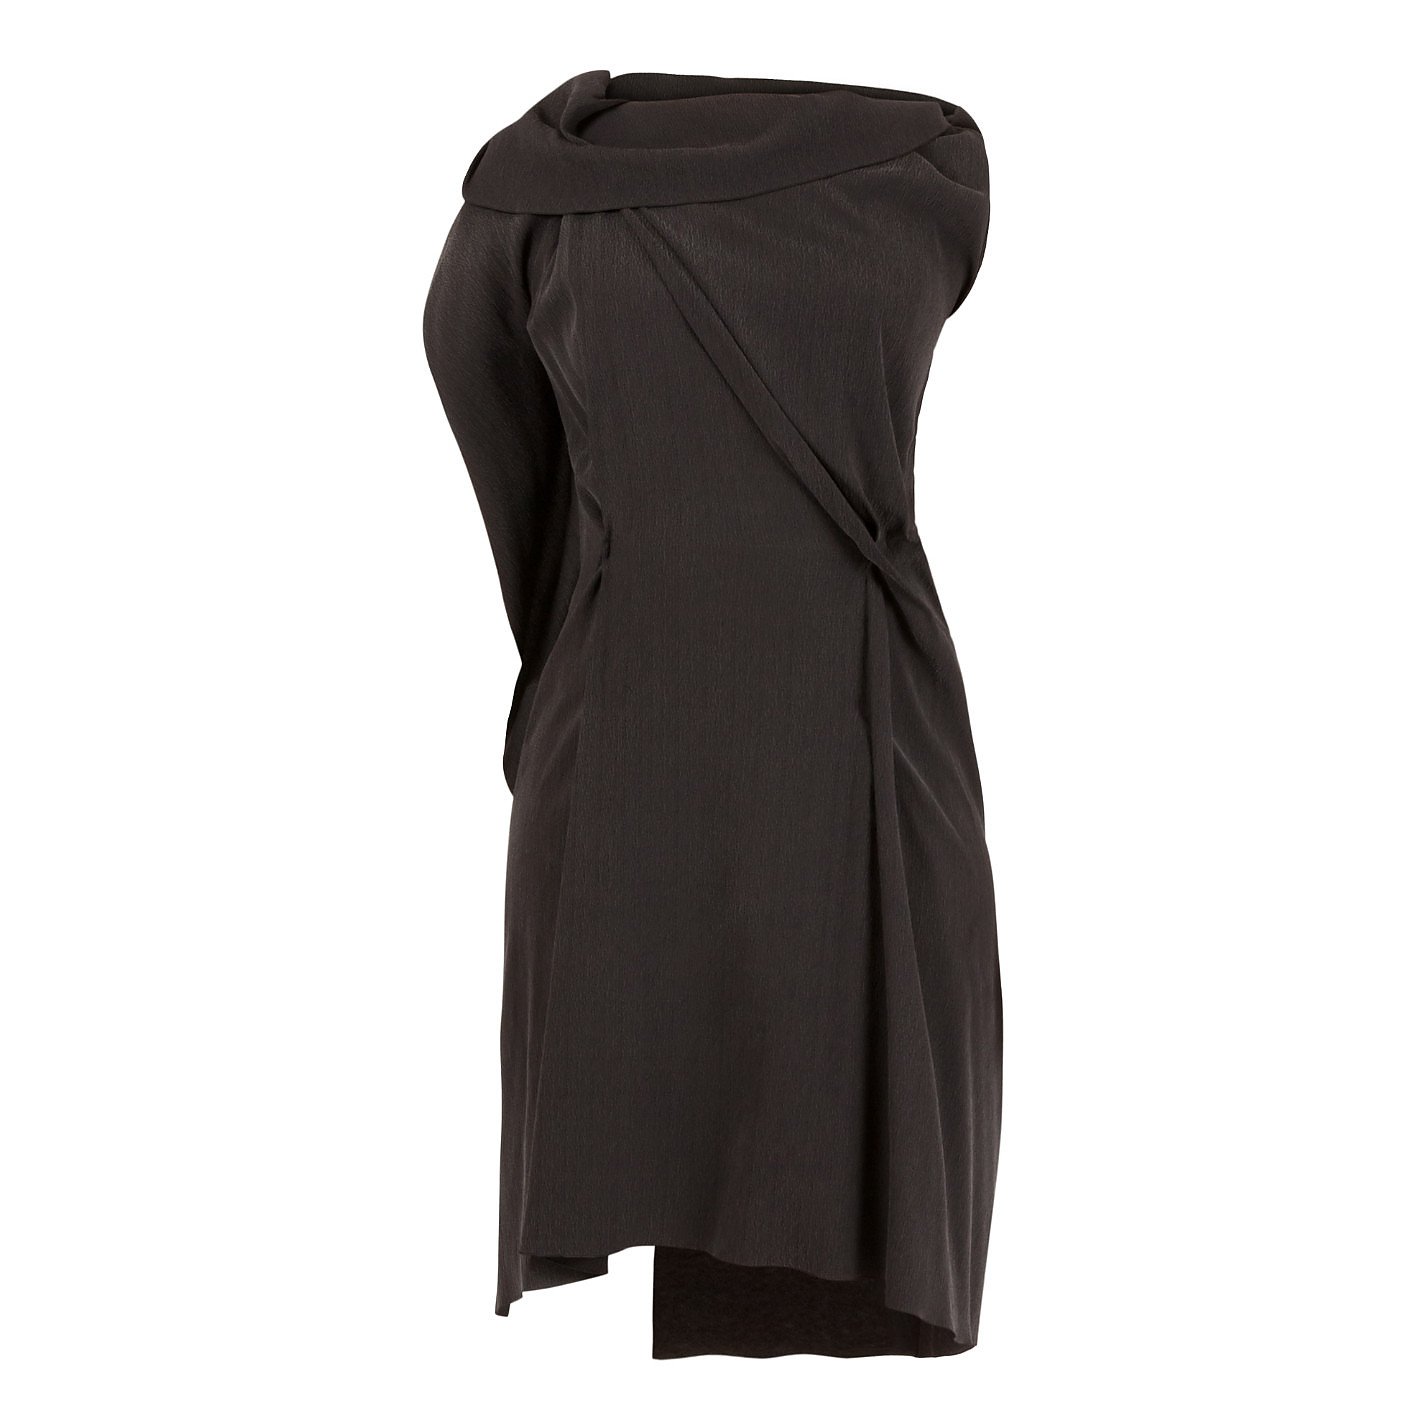 Rent Or Buy Rm By Roland Mouret Draped Silk Crepe Dress From Mywardrobehq Com